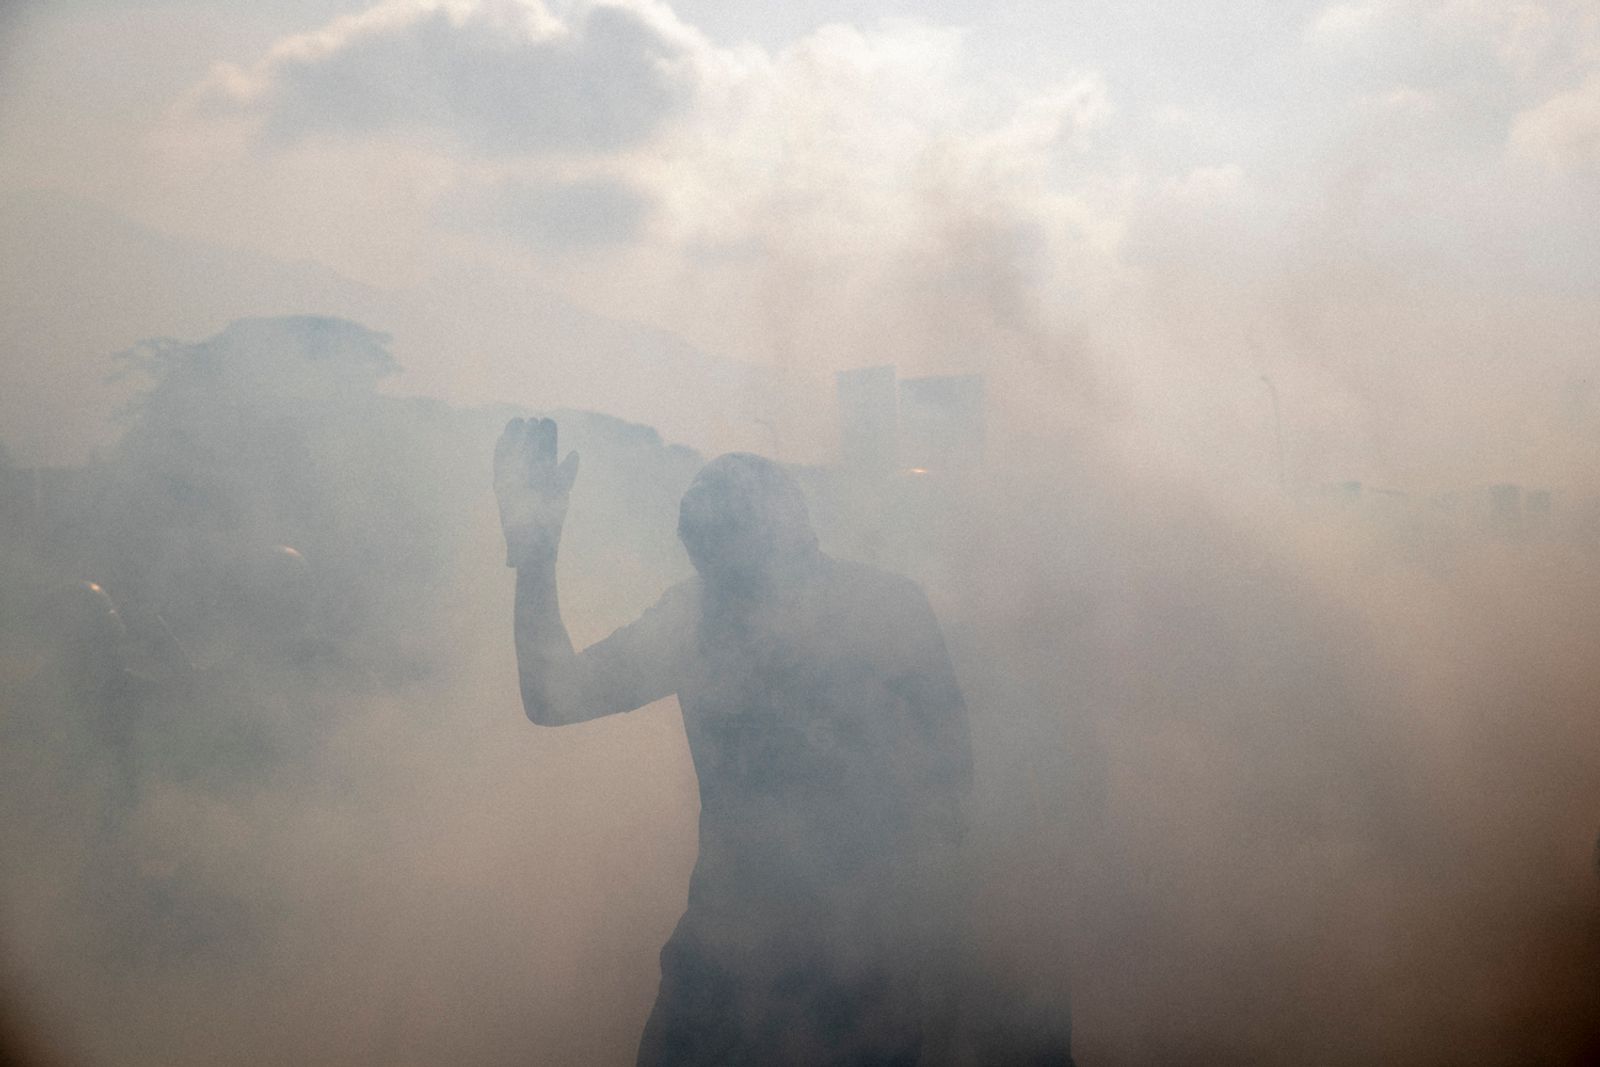 © Fabiola Ferrero - A man in the middle of tear gas during a military uprising in Caracas on April 30, 2019.